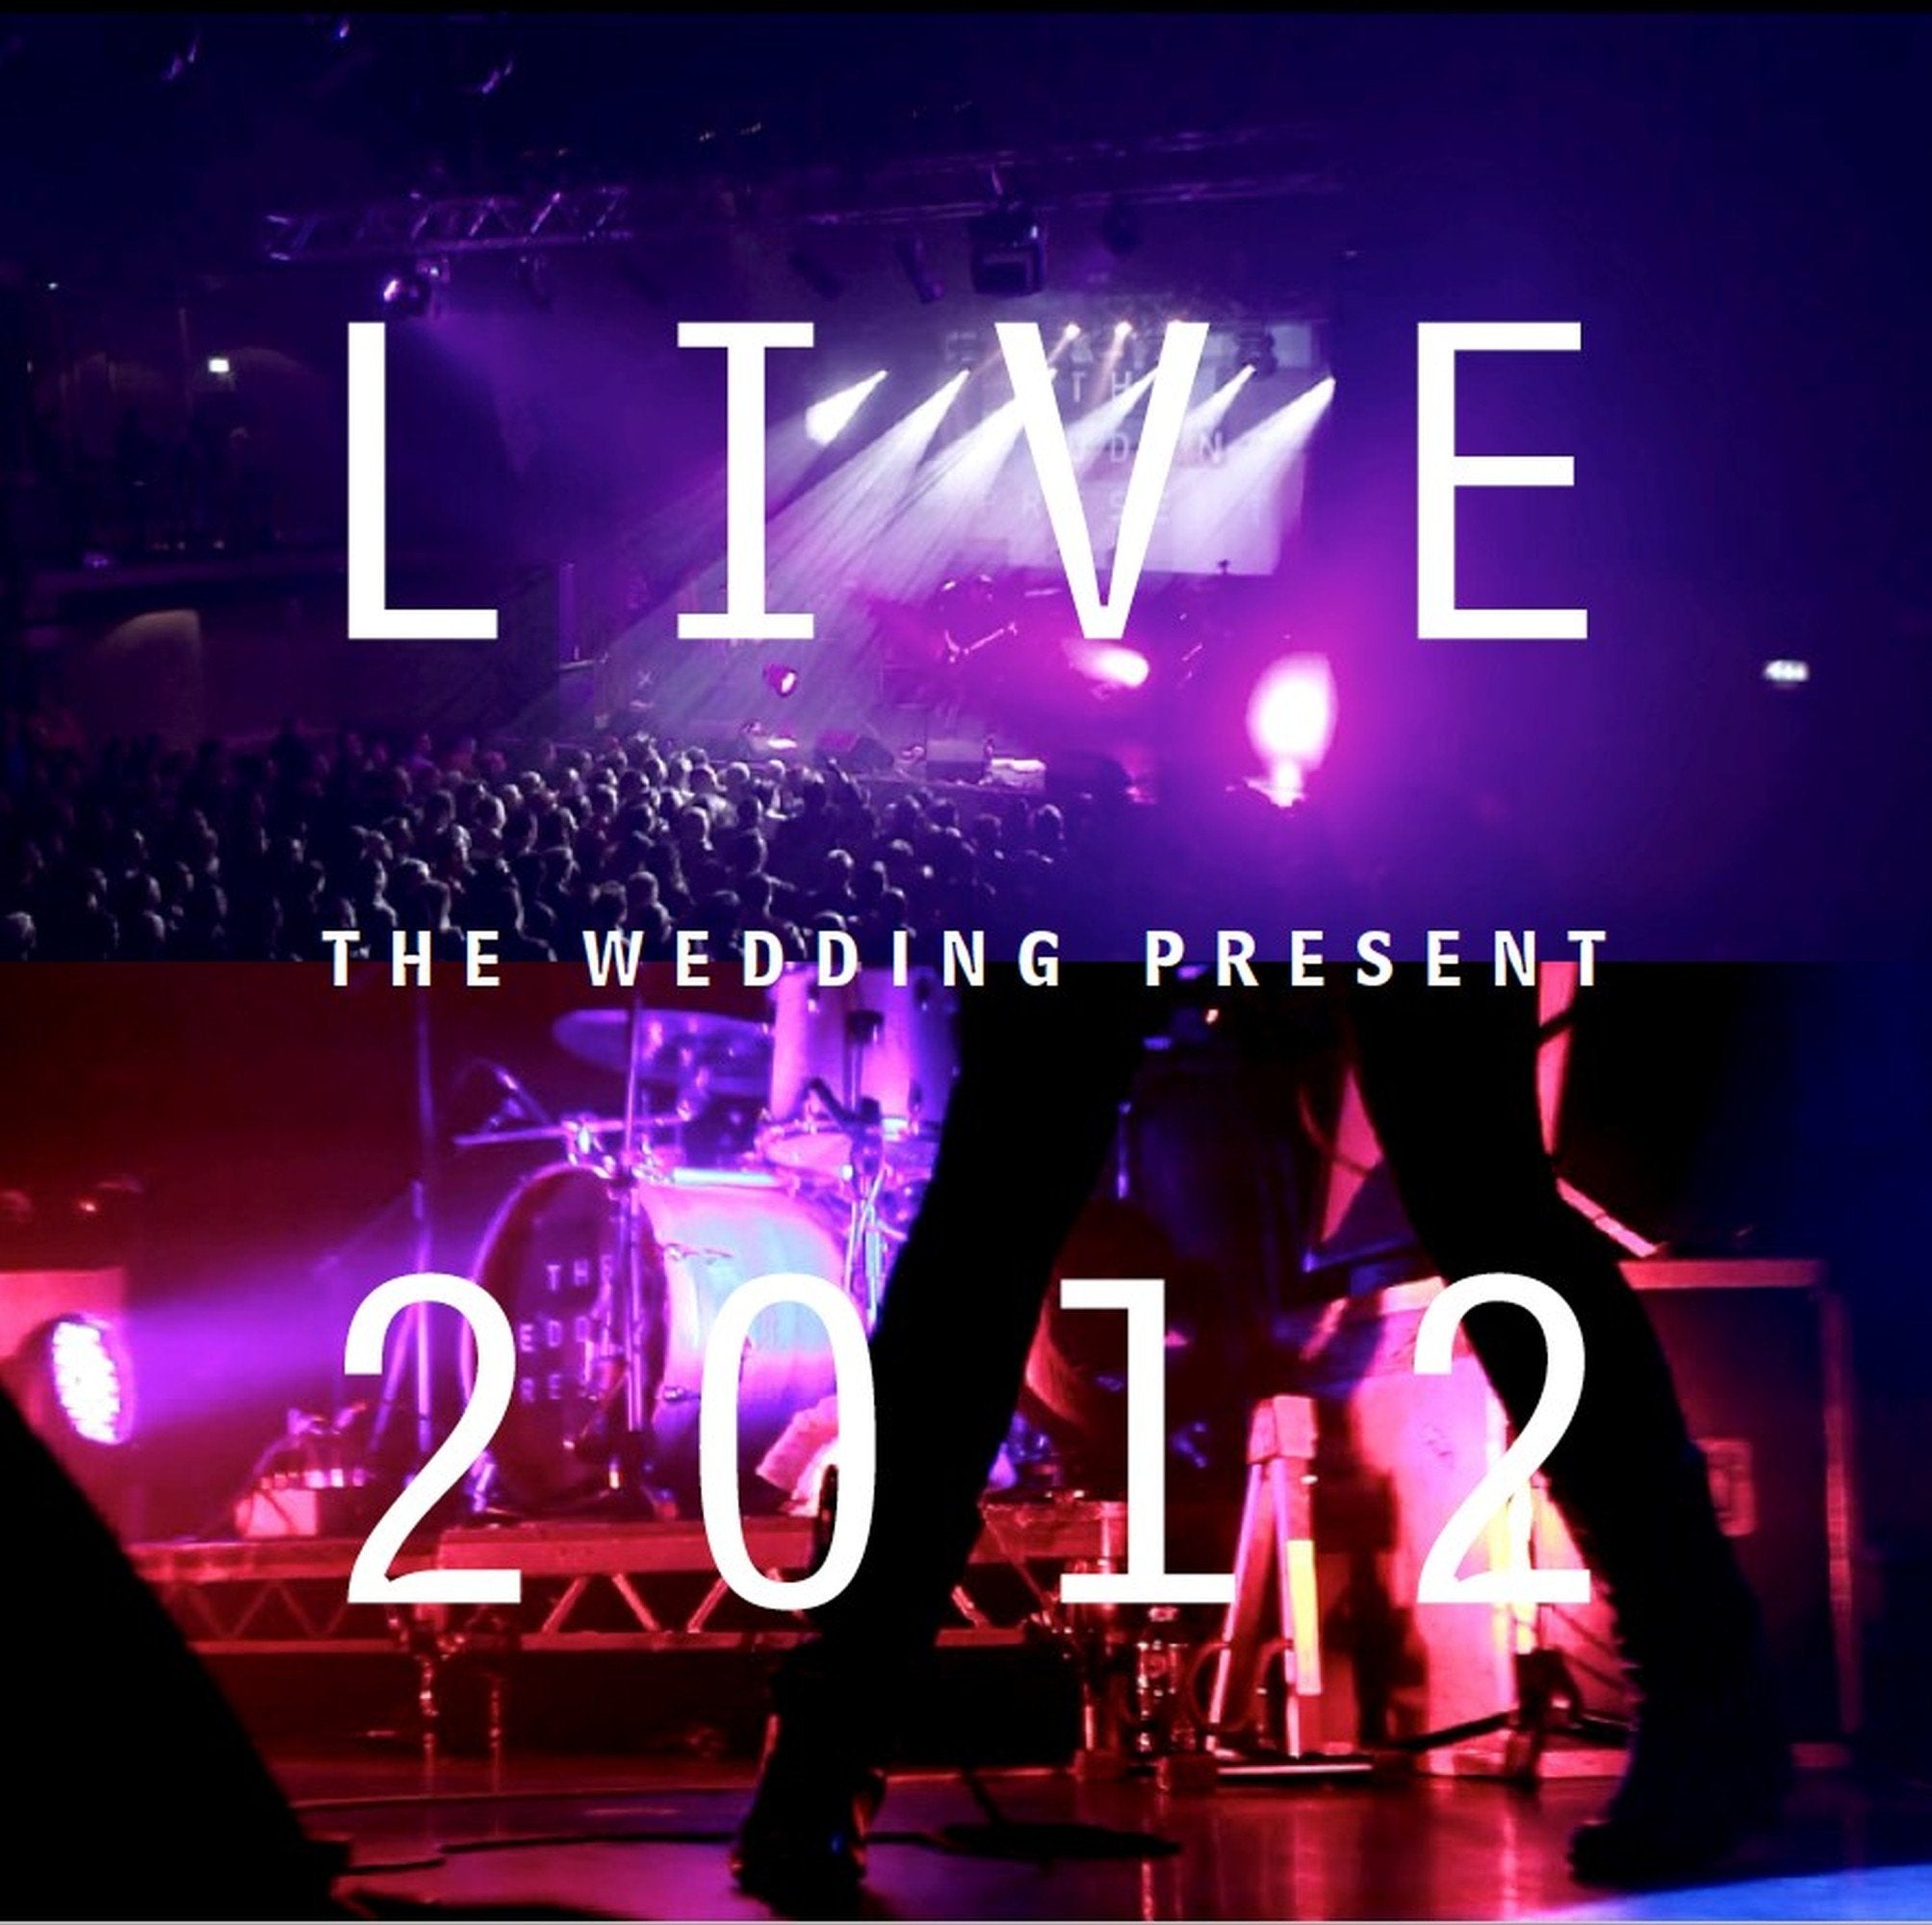 THE WEDDING PRESENT - Live 2012: Seamonsters Played Live In Manchester - CD & DVD Set